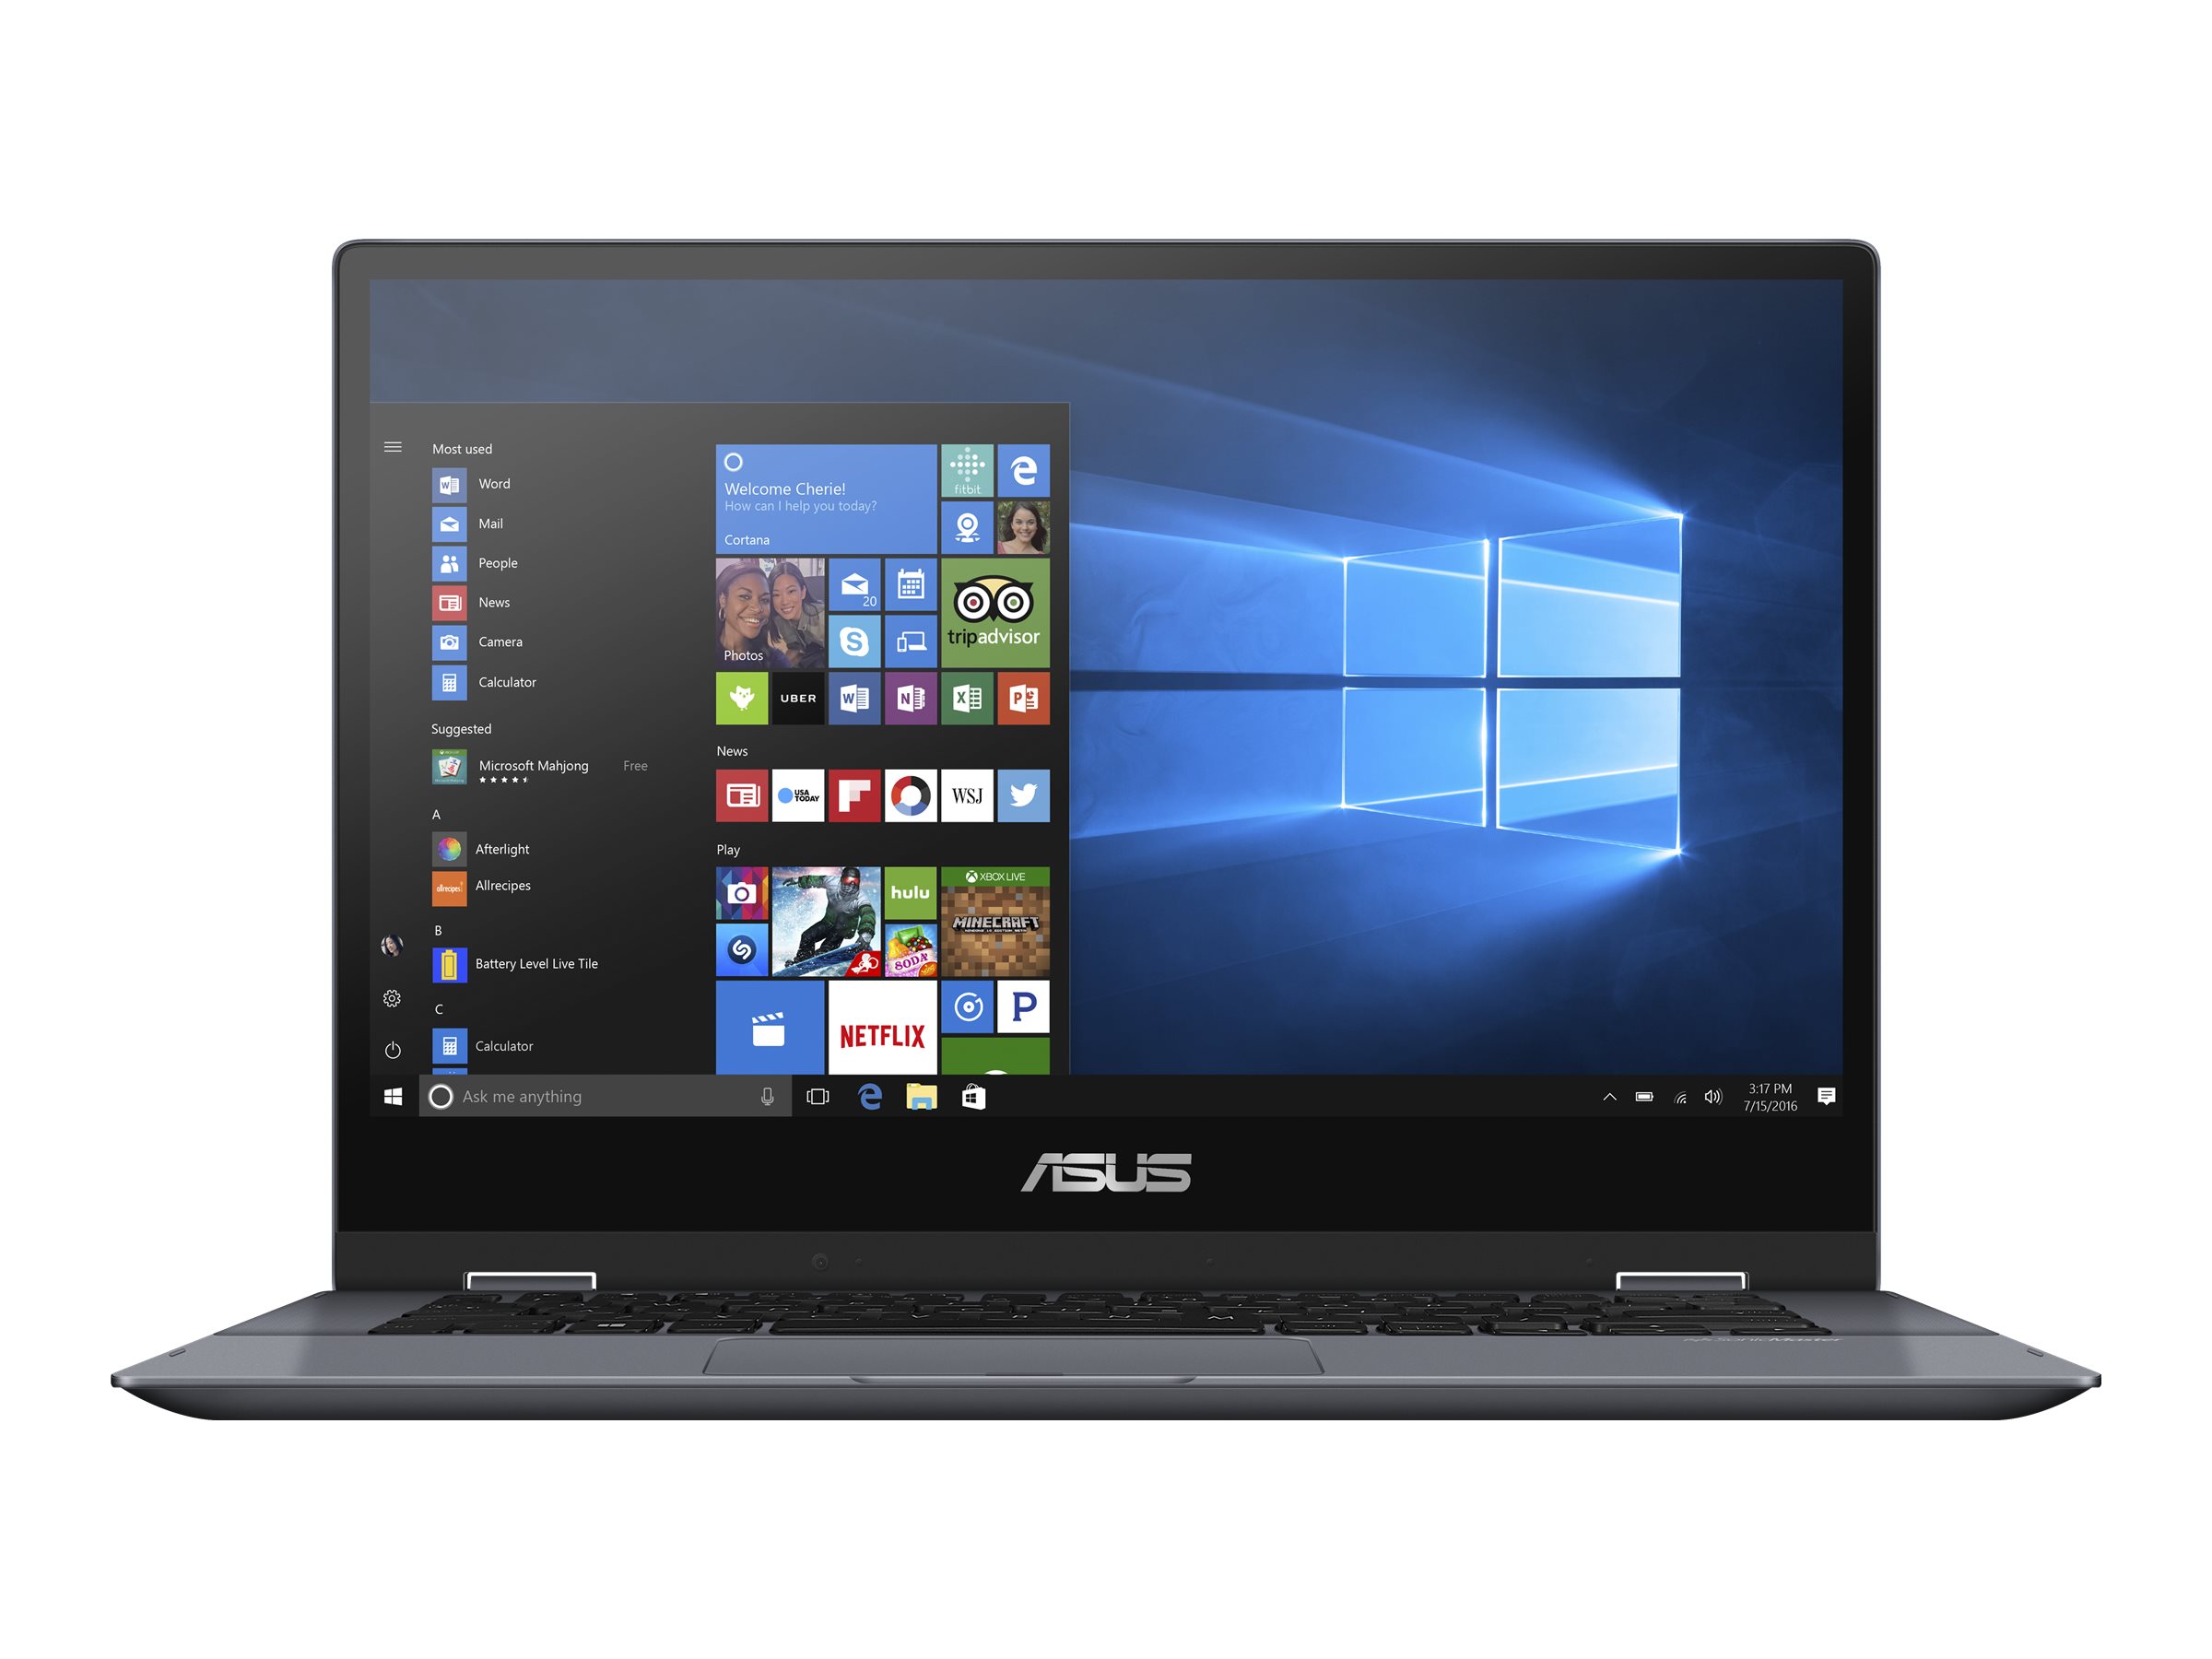 ASUS VivoBook Flip TP412 14" FHD Touch 2-in-1, Intel Core i3-8145U, Intel UHD Graphics 620, 4GB RAM, 128GB SSD, Windows 10 in S Mode, Star Grey, TP412FA-OS31T - image 4 of 14